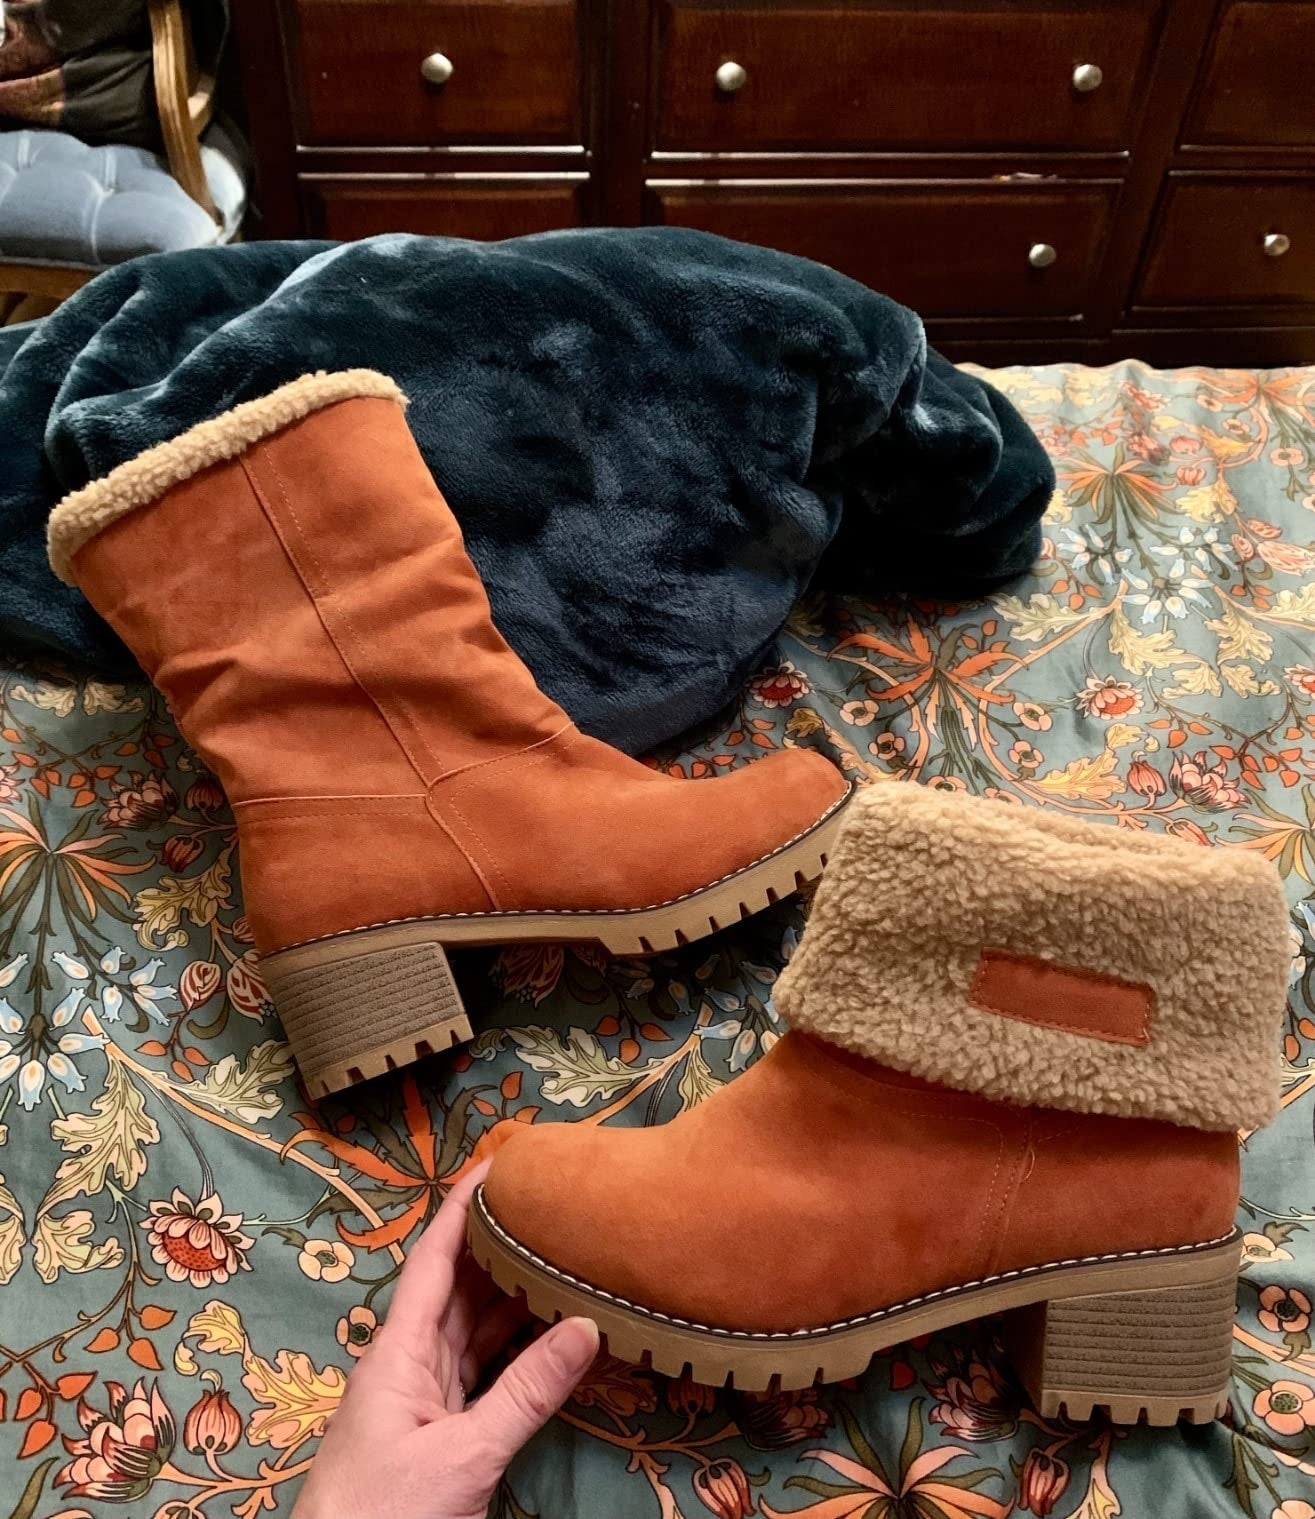 A pair of boots with fuzzy lining and chunky soles rests on a floral bedspread, one standing and one fallen to the side